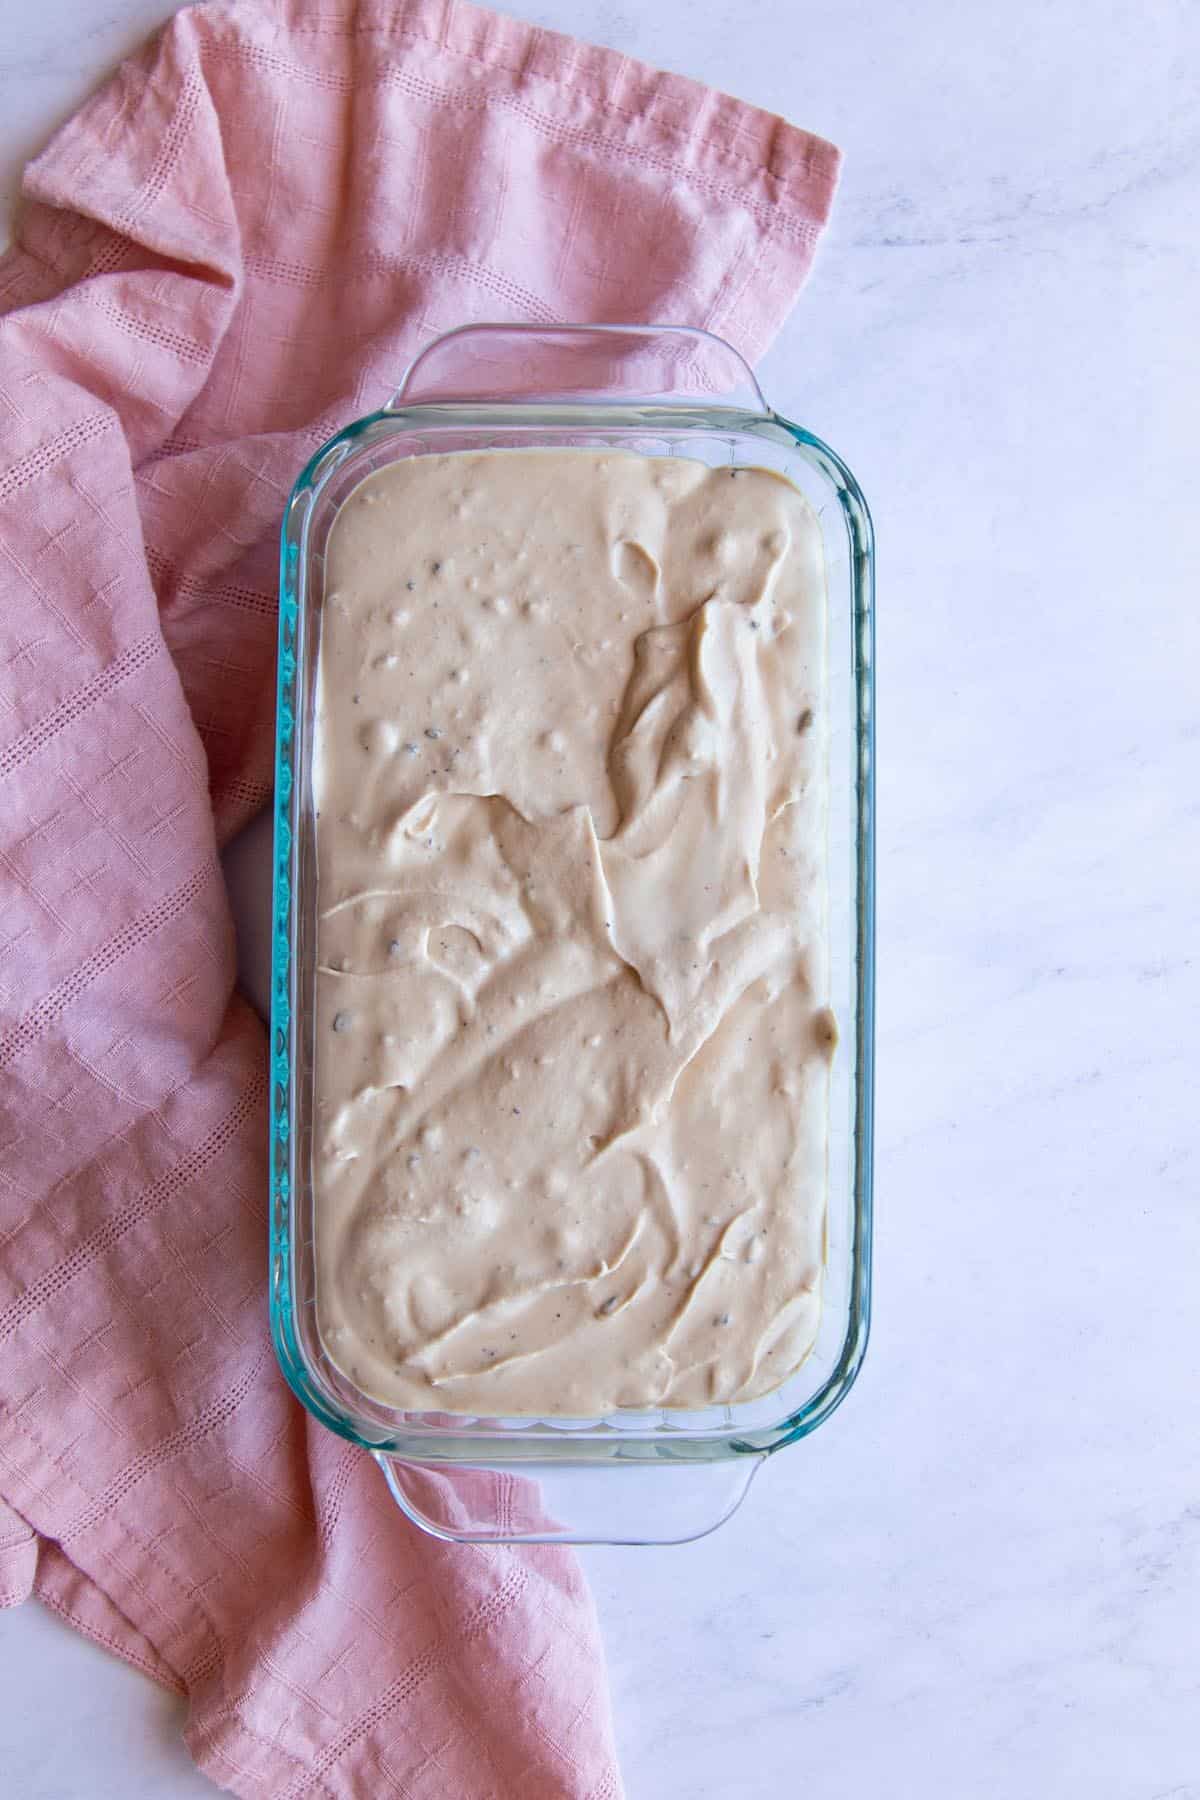 Frozen coffee macadamia ice cream in a glass loaf pan.